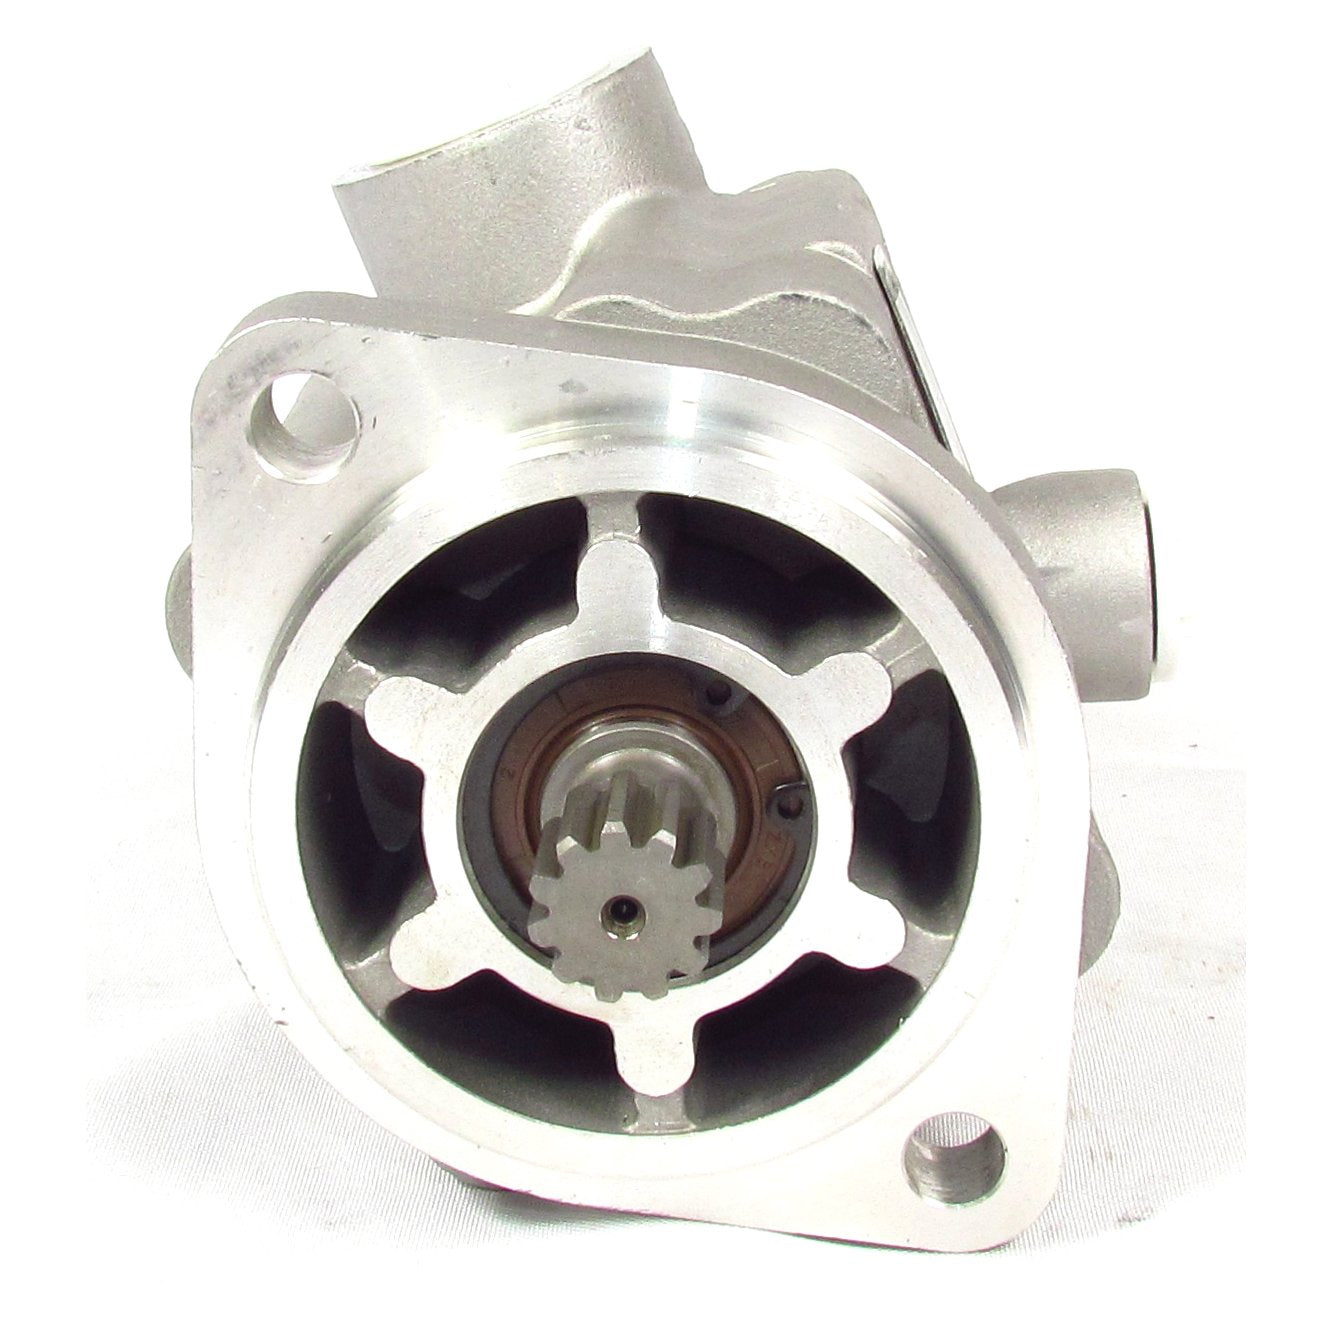 Fortpro Power Steering Pump Compatible with Cummins 6CT & CAT 3116 Engines Replacement for 542-0320-10 | F255713